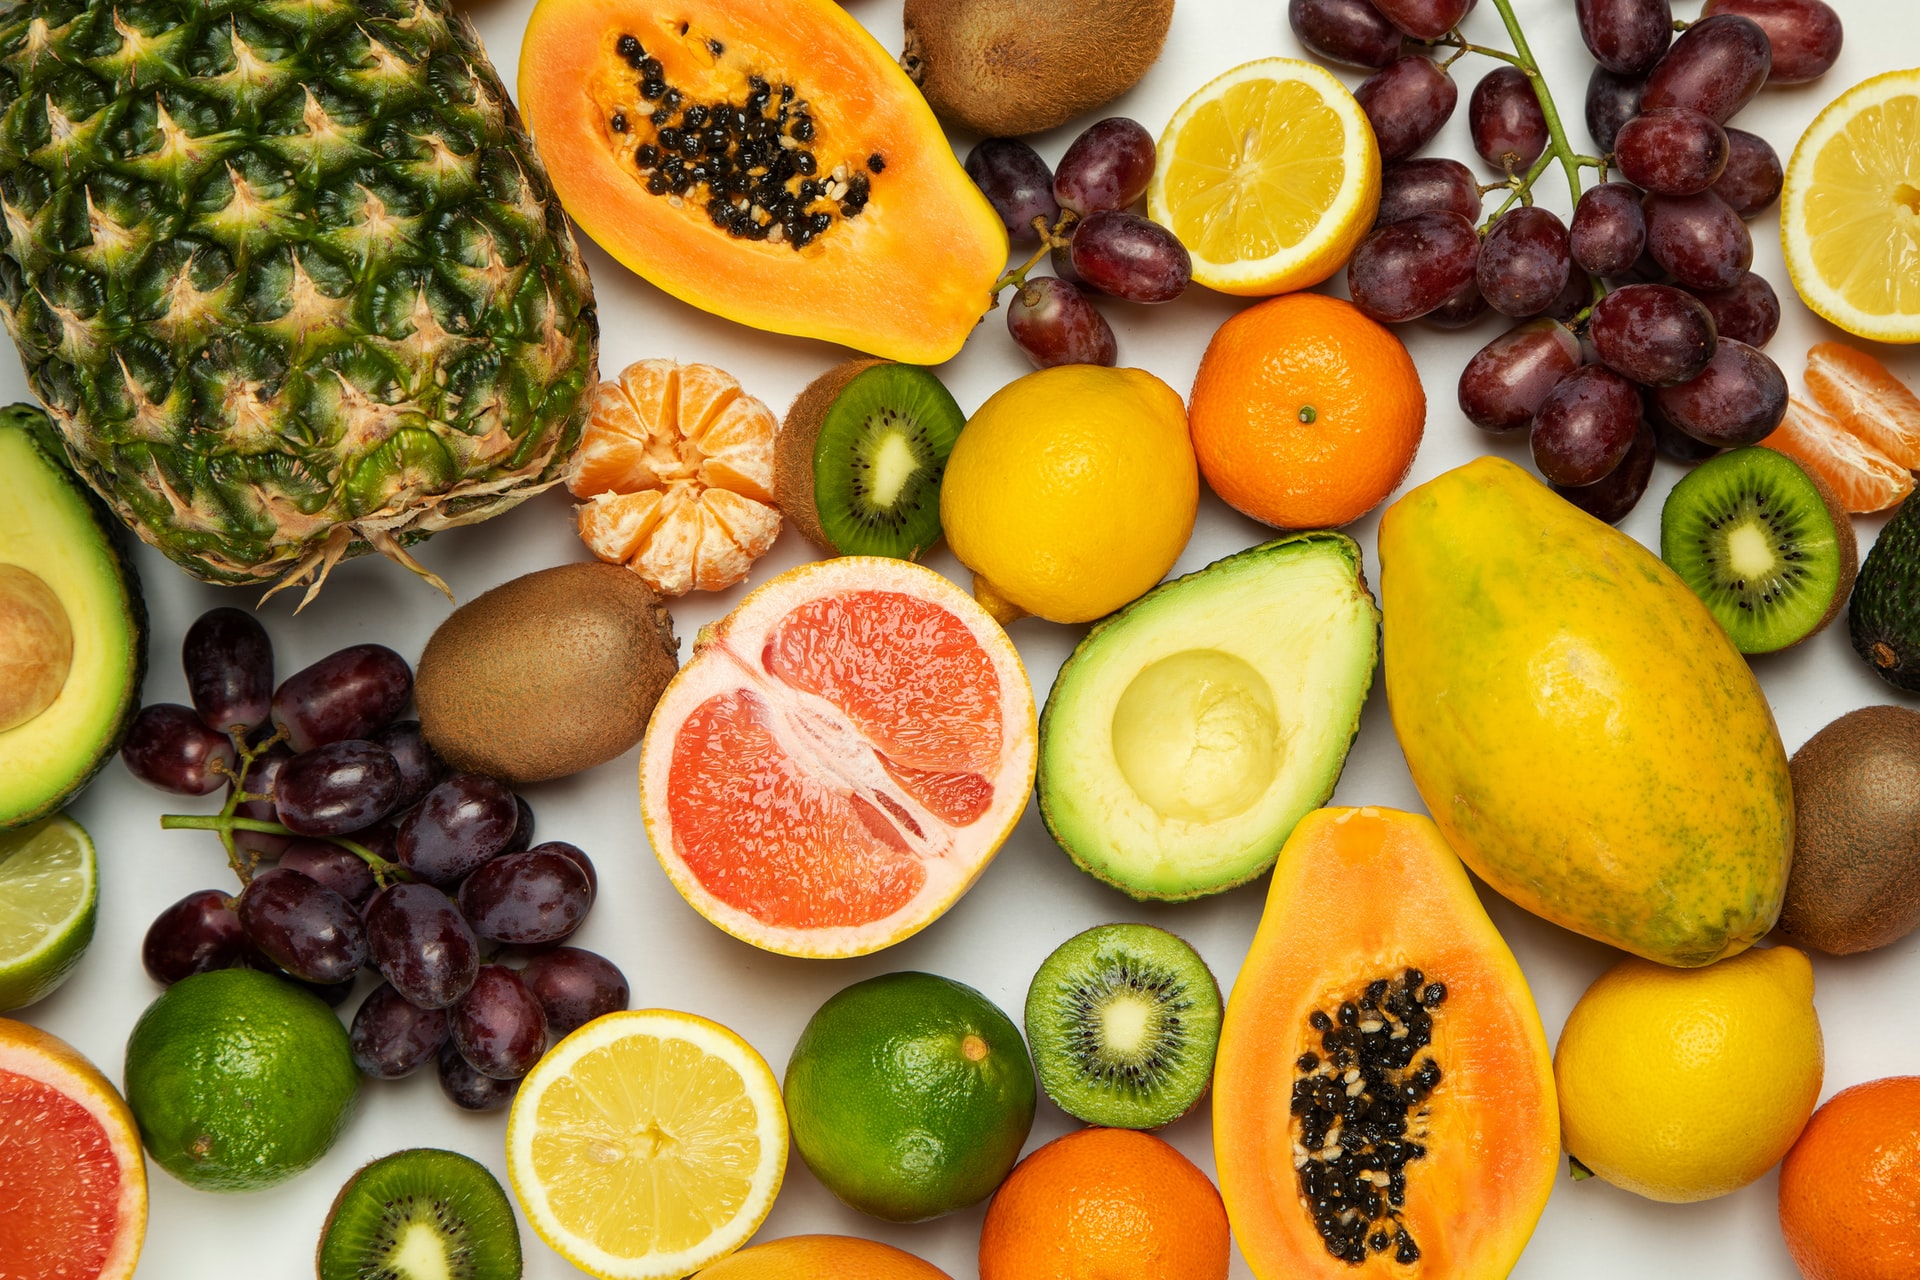 What fruits can you eat while pregnant?